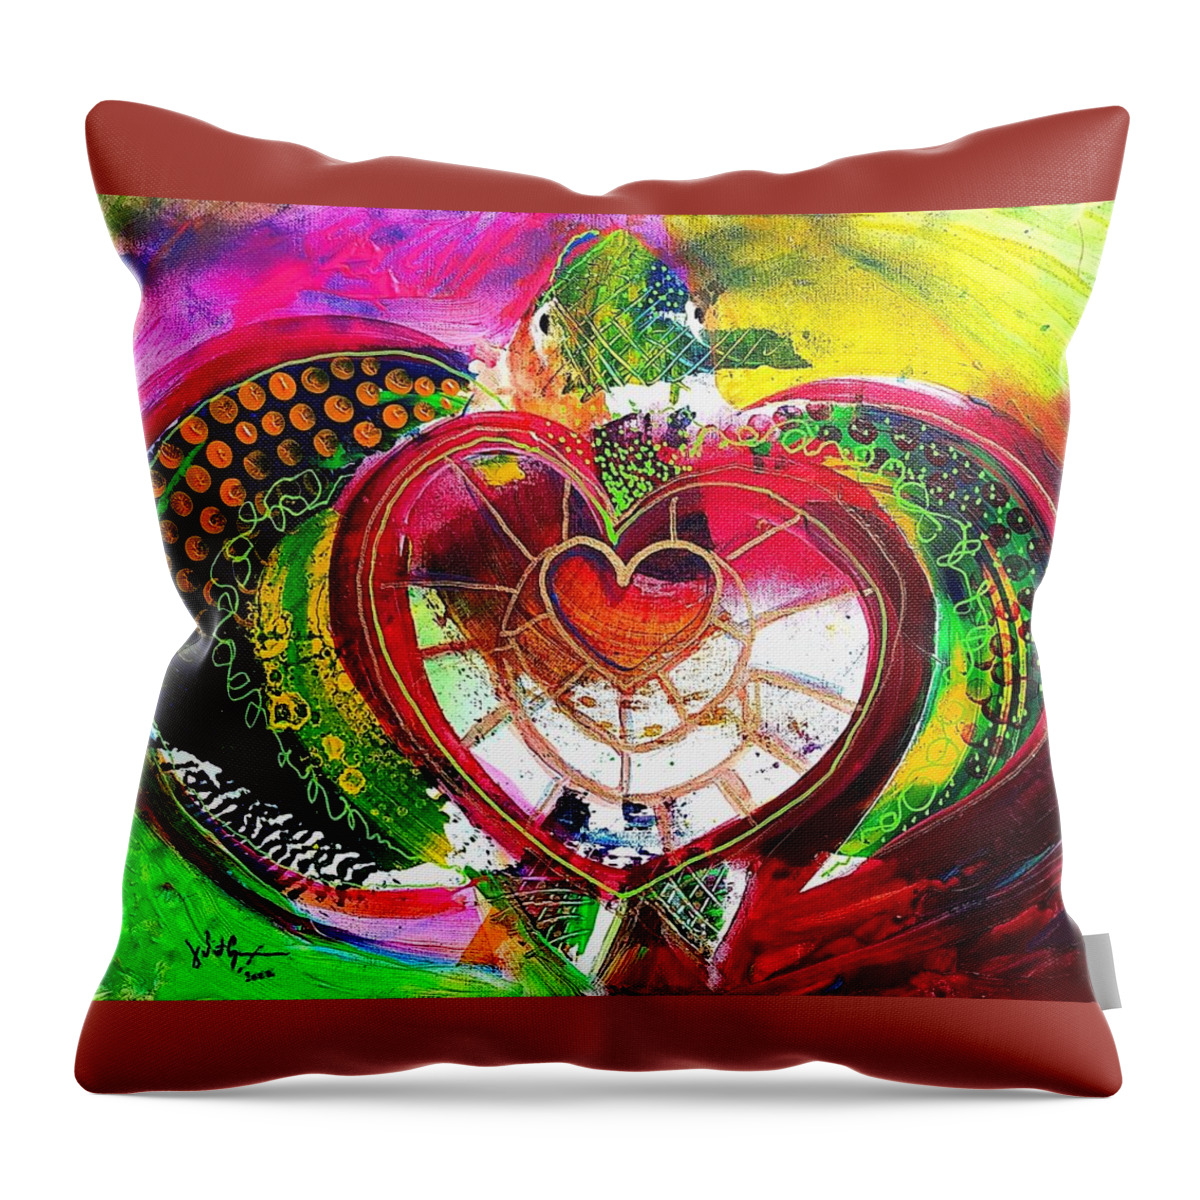 Sea Turtle Throw Pillow featuring the painting Hearty, Spicy Sea Turtle by J Vincent Scarpace